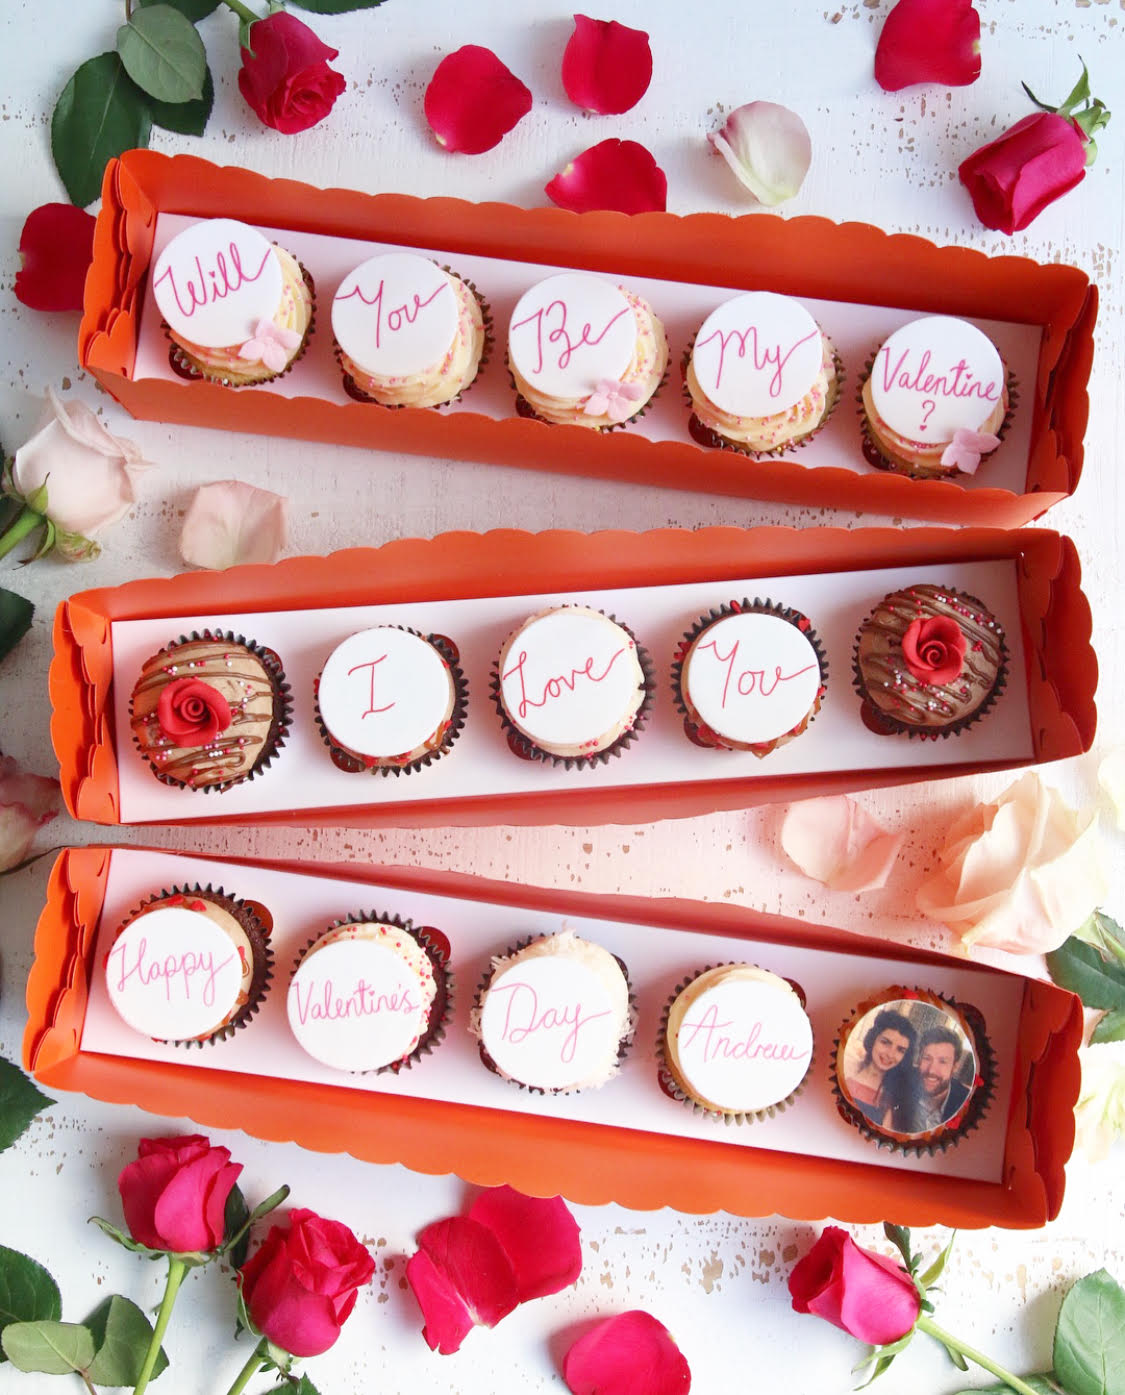 Say It With Cake...Valentine's Cupcakes